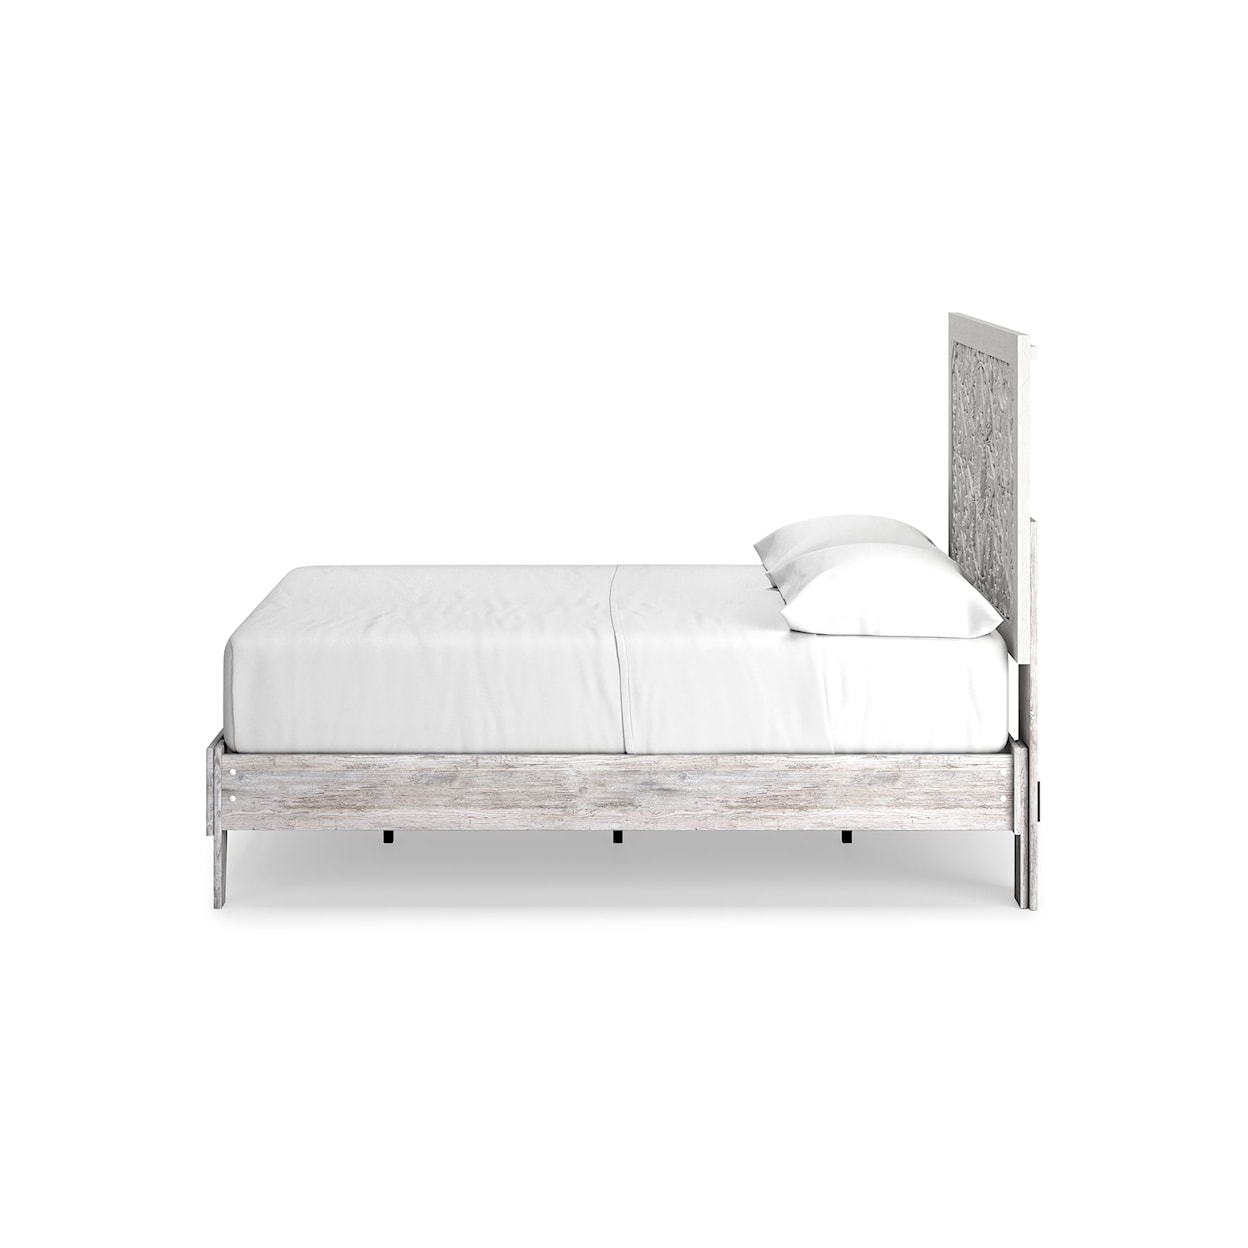 Signature Design by Ashley Paxberry Full Panel Platform Bed